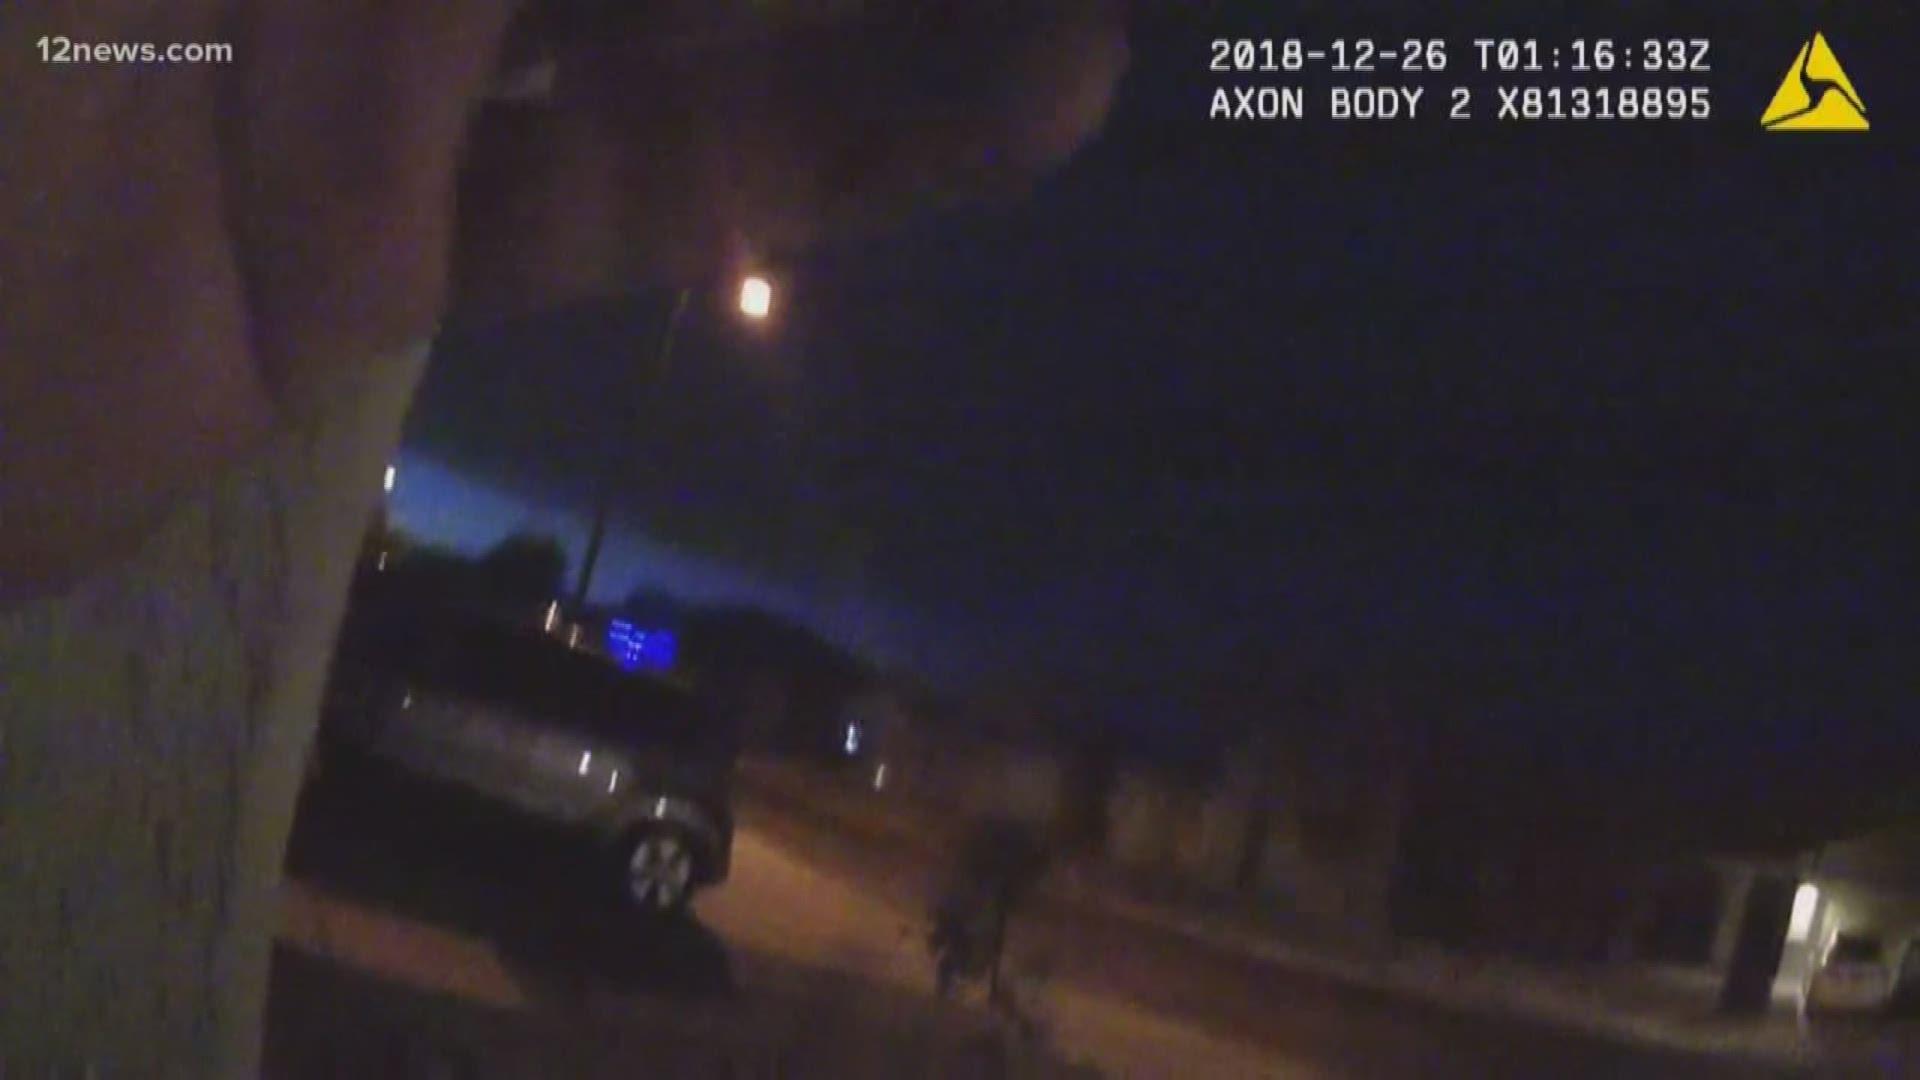 Video shows a man opening fire on Buckeye police on Christmas last year. Police surrounded the home after the man's girlfriend said he was armed and "acting crazy."